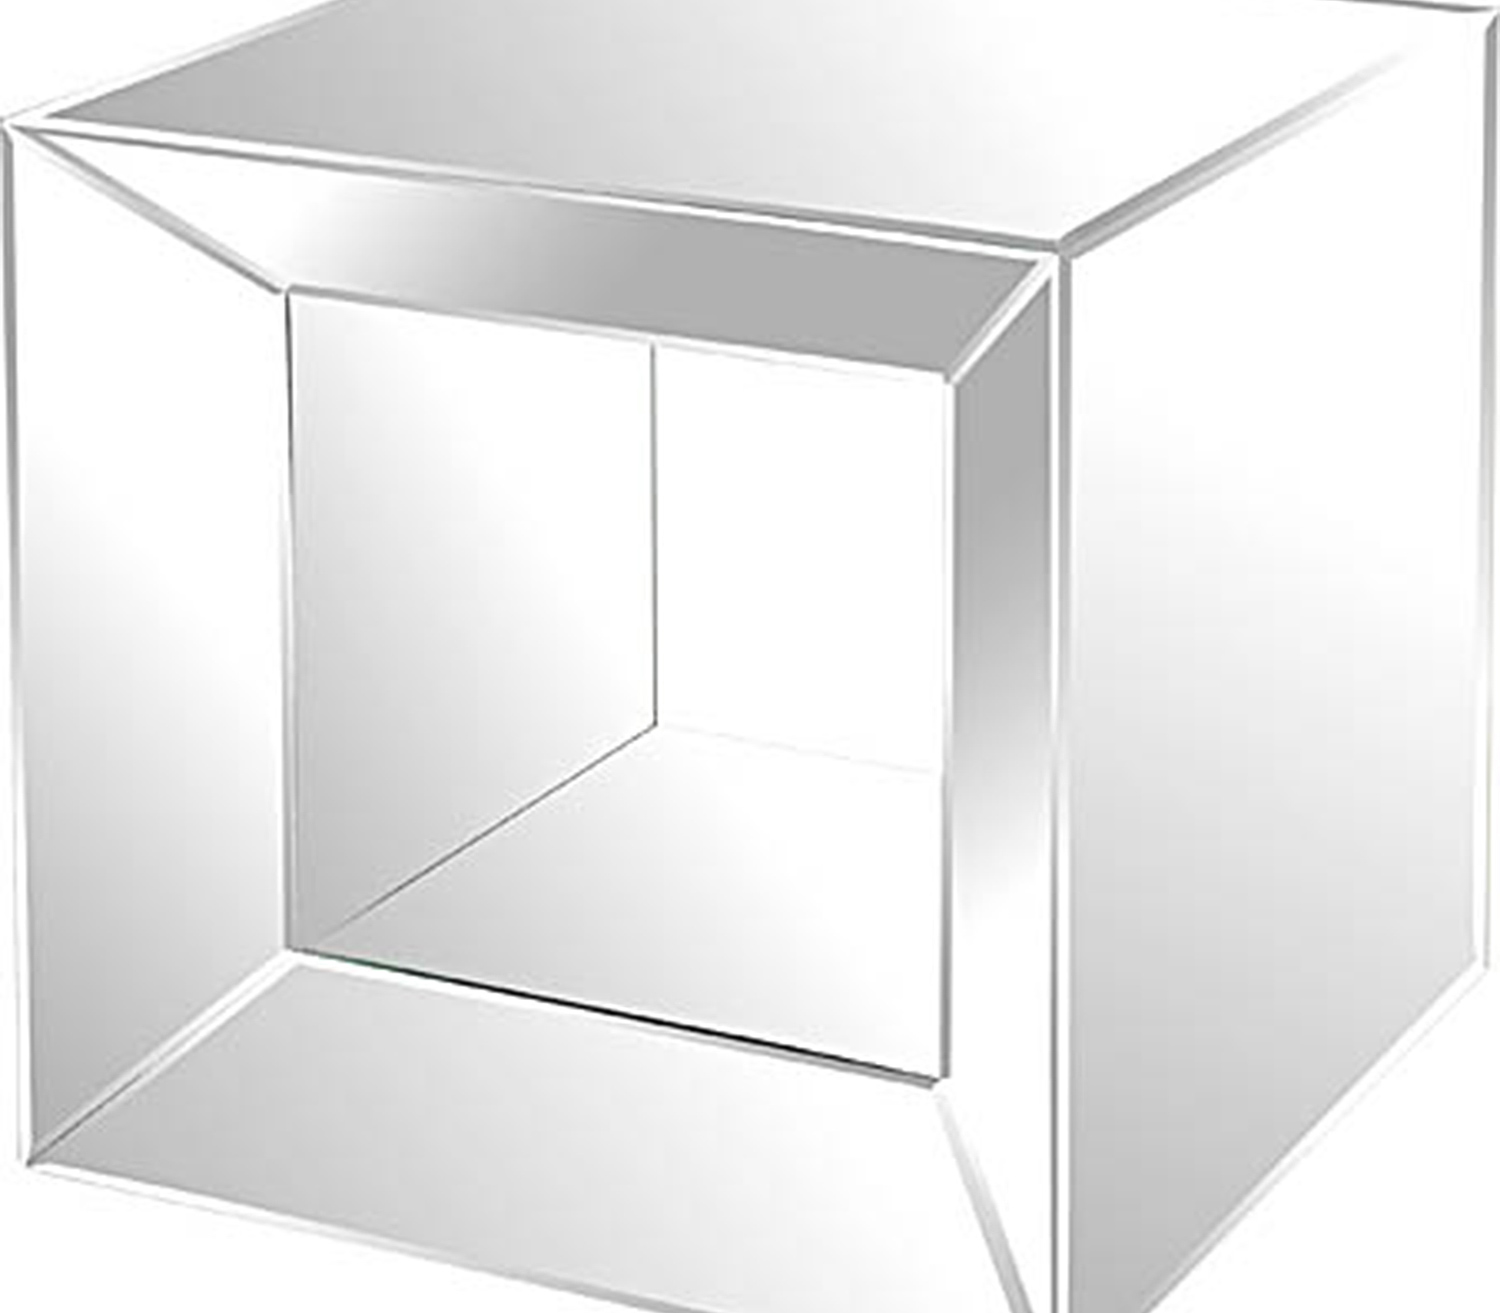 Ren-Wil Mirrored Accent Table - Glass